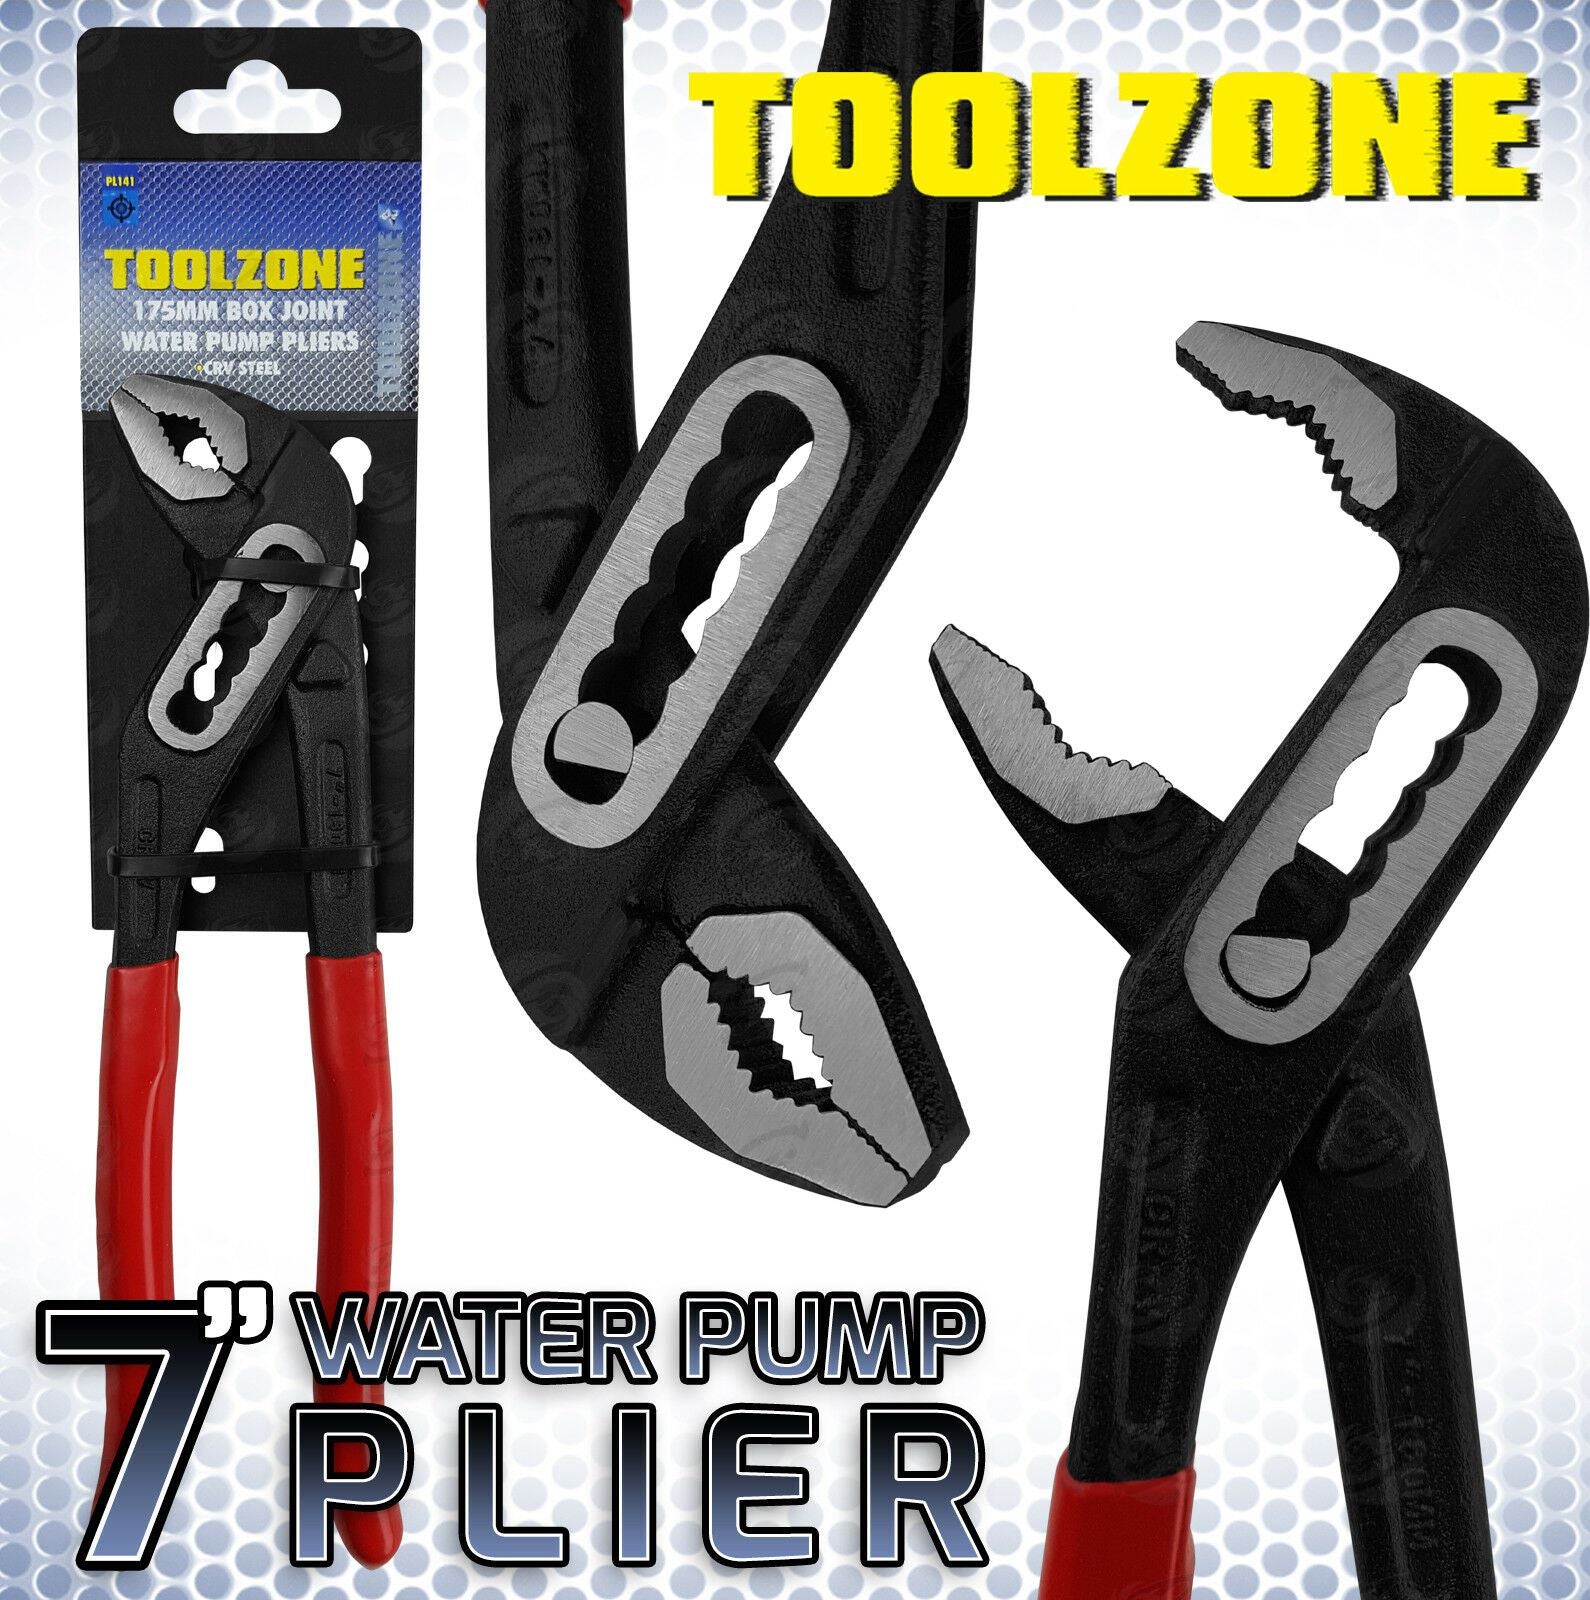 TOOLZONE 7" BOX JOINT WATER PUMP PLIERS